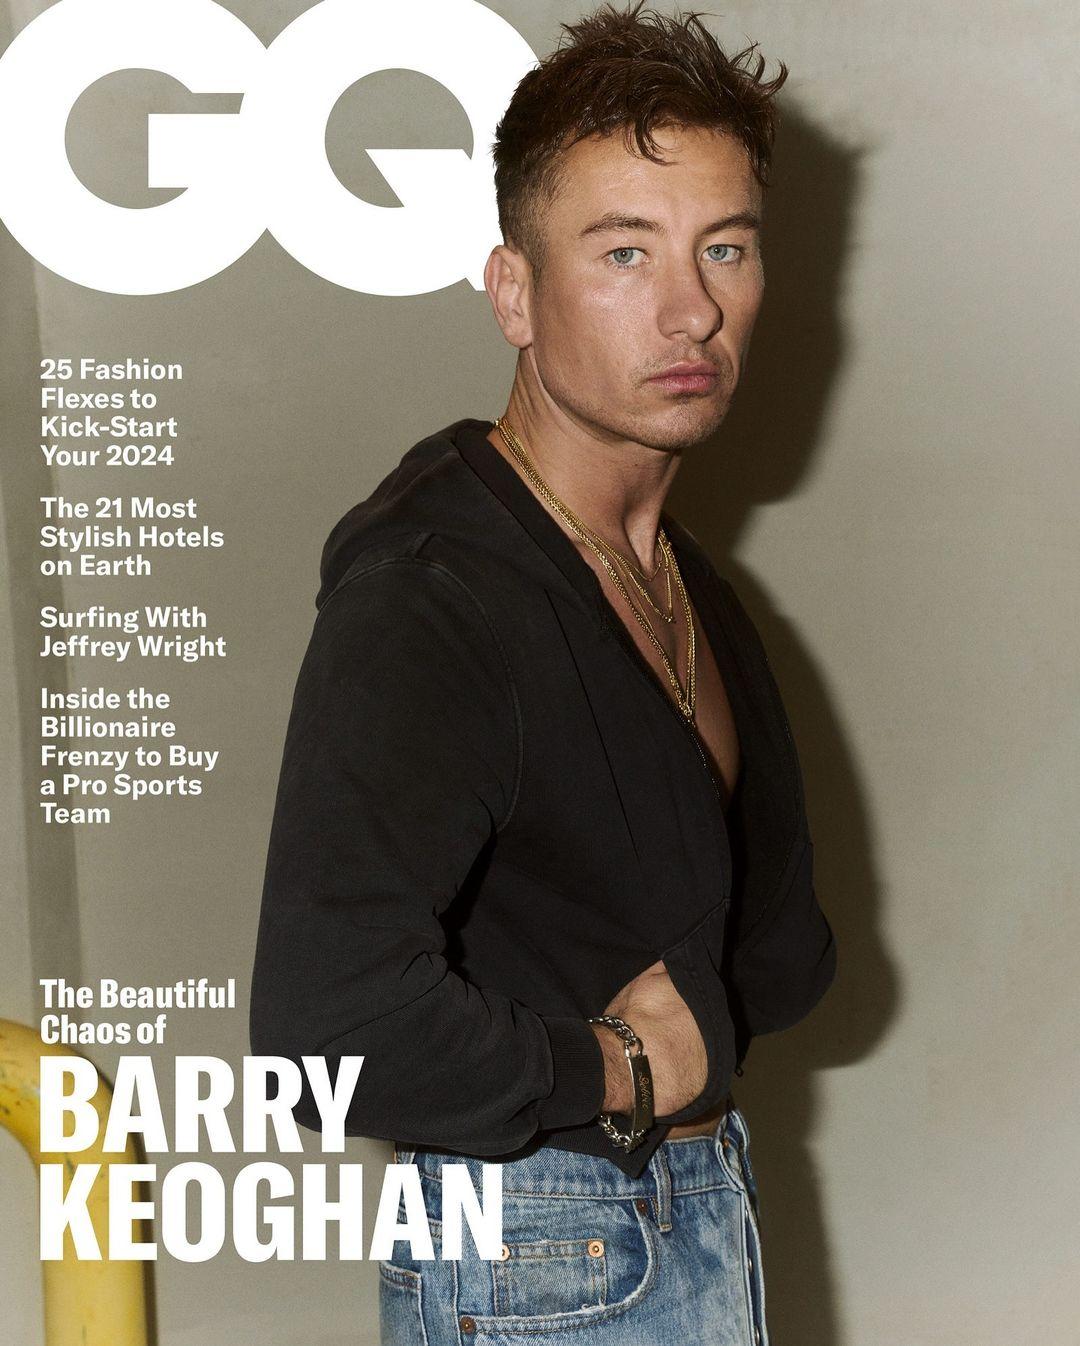 “I wrote this down in my to-do list—to be onna cover of GQ. I’m not even sh*ttin’ you. I wrote that down.” 

Presenting GQ’s February cover star: Barry Keoghan.

He’s one of our most exciting actors—a combustible shape-shifter onscreen, a moon-howling dynamo off it. And he spent the last couple years achieving his Hollywood aspirations at an absurd clip. Now, @keoghan92 is confronting a rather novel dilemma: deciding which dreams to manifest next. Read the story by @pappademas and see the photos by @jason_nocito_studio at the link in bio. 

Written by @pappademas
Photographs by @jason_nocito_studio
Styled by @taylor__mcneill
Hair by @tomojidai using Oribe
Skin by @charlottewillermakeup at Home Agency
Set design by @rosie__turnbull
Pigeons provided by @berlonitheatricalanimals 
Produced by @henstoothproductions